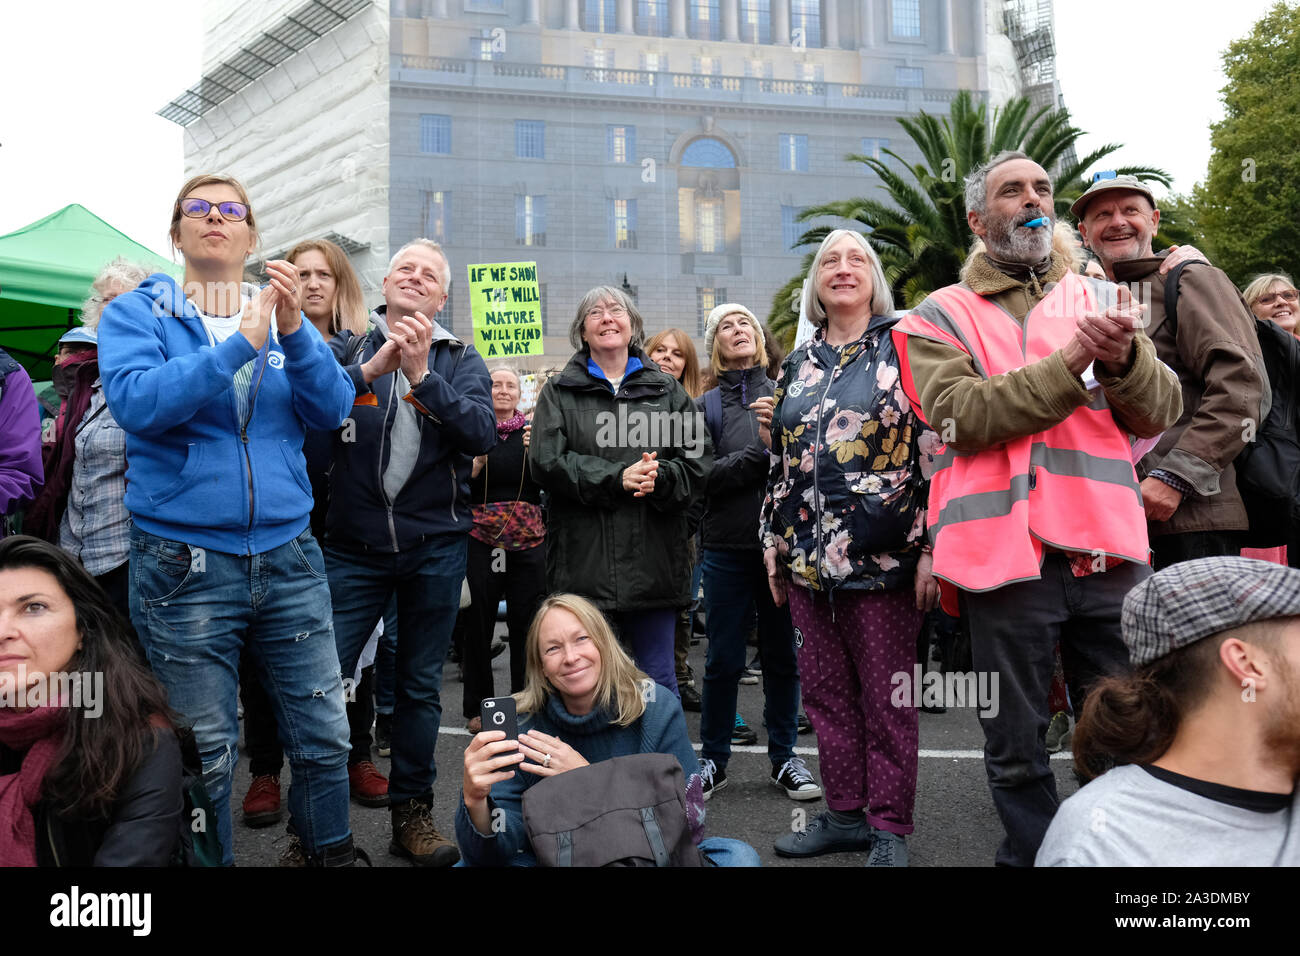 Westminster, London, UK - Monday 7th October 2019 - Extinction Rebellion XR climate protesters applaud a speech as they block the northern side of Lambeth Bridge. Photo Steven May / Alamy Live News Stock Photo